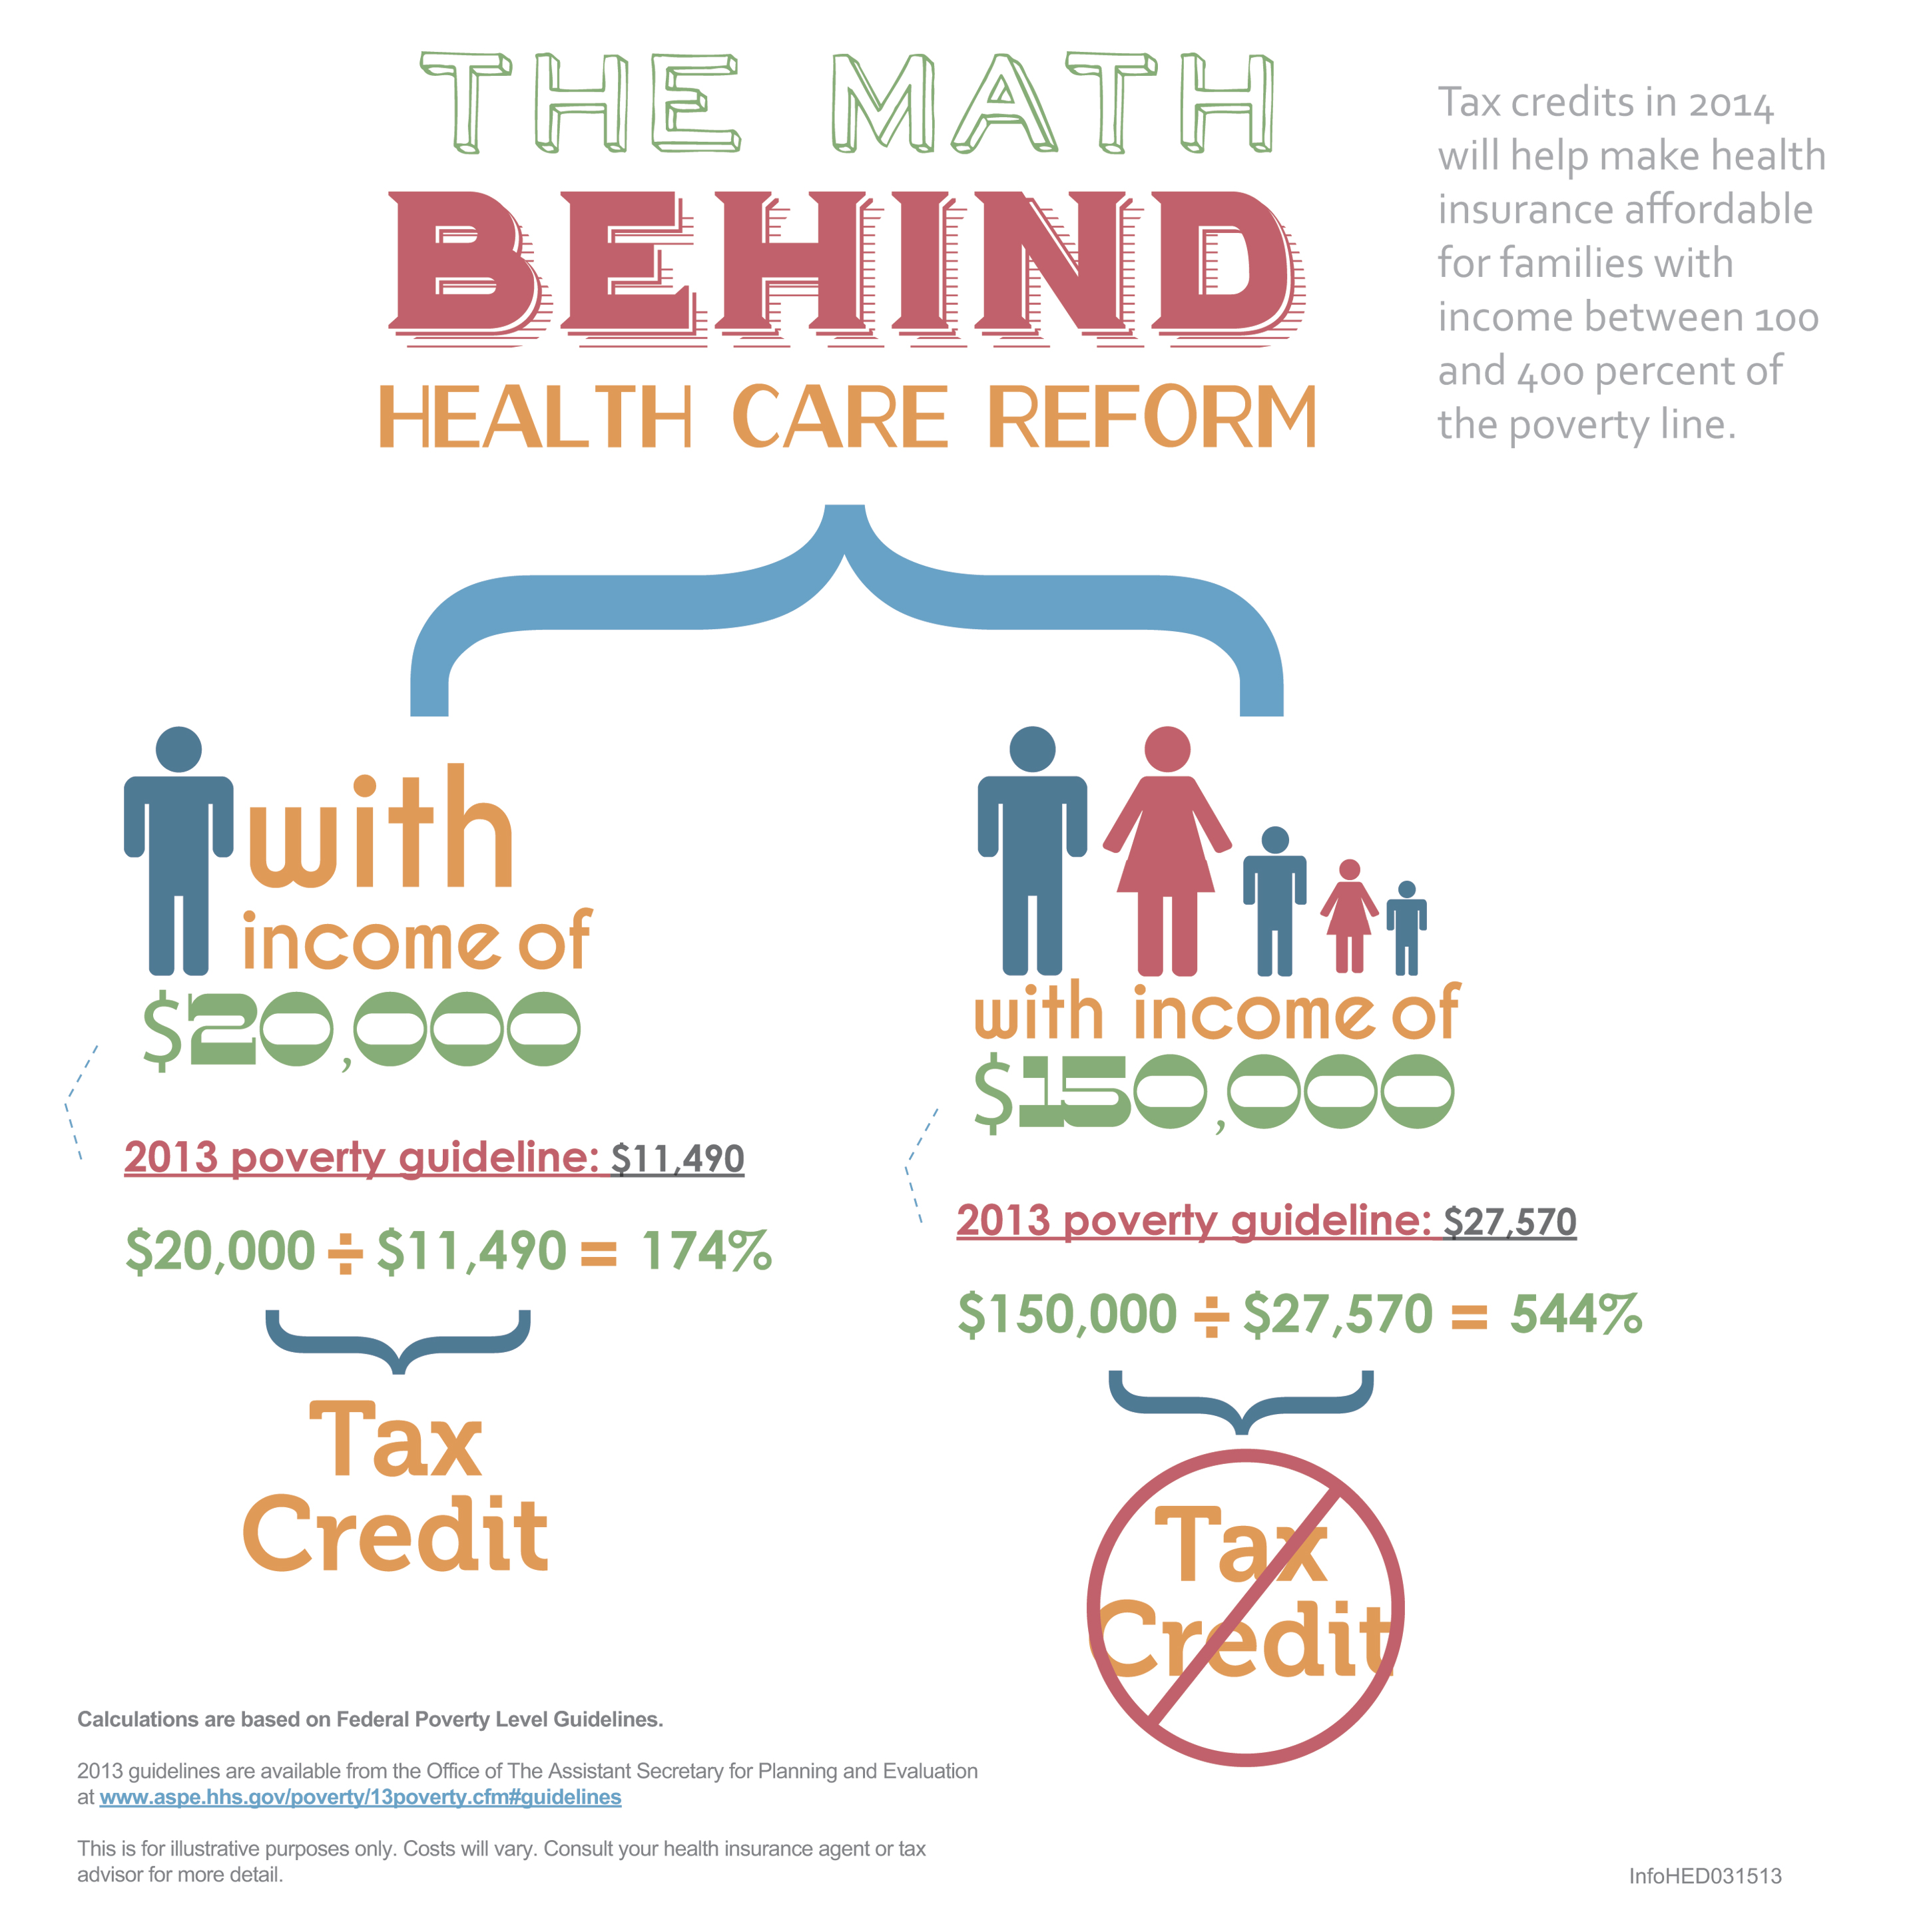 IHC Specialty Benefits Releases an Affordable Care Act ...